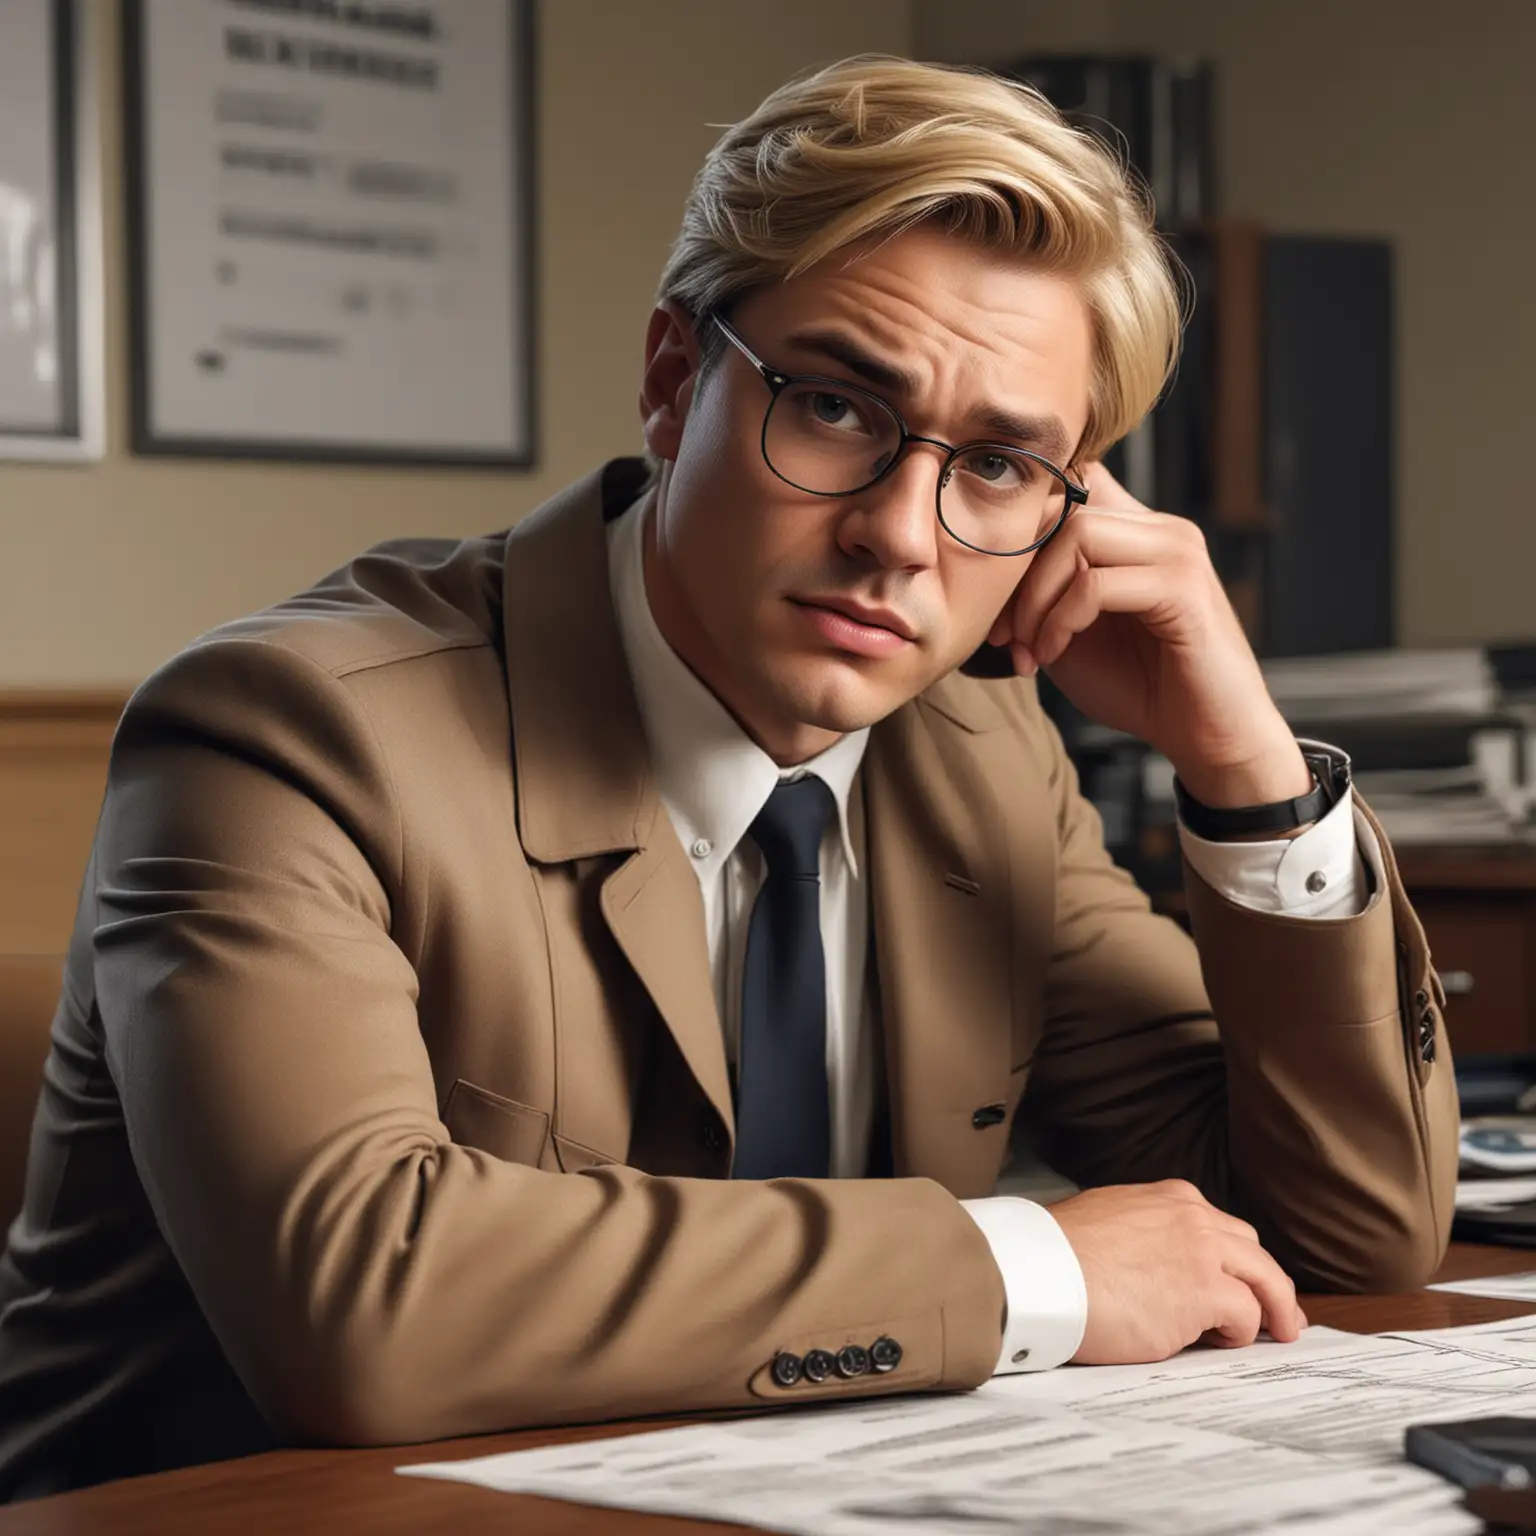 A human male, detective, worrying facial expression, blonde hair, glasses, sitting in a detective’s office, realistic